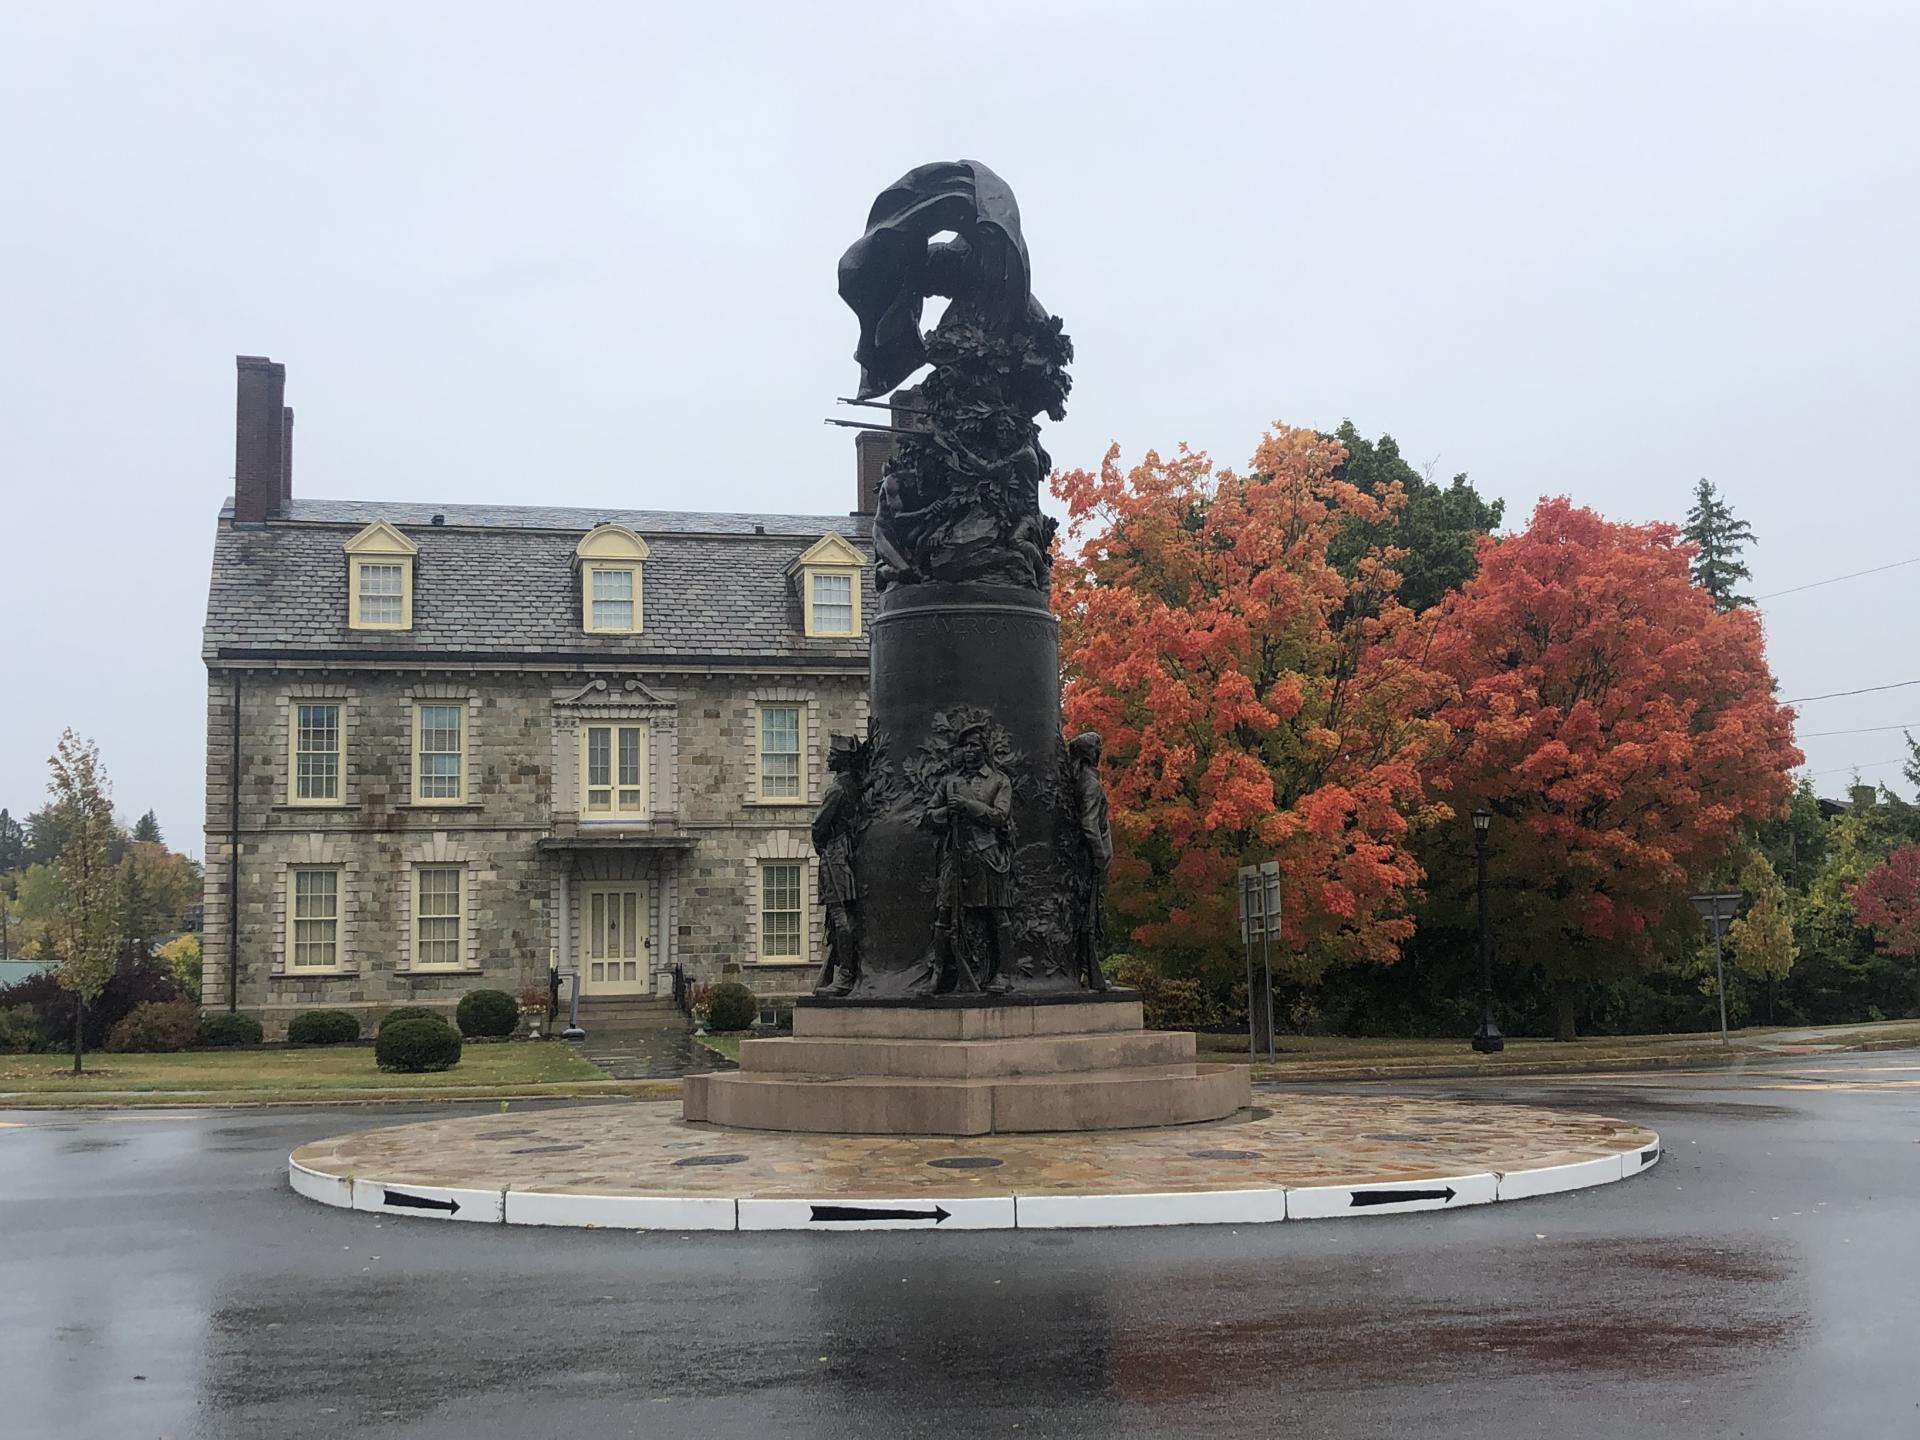 A large stone building and statue